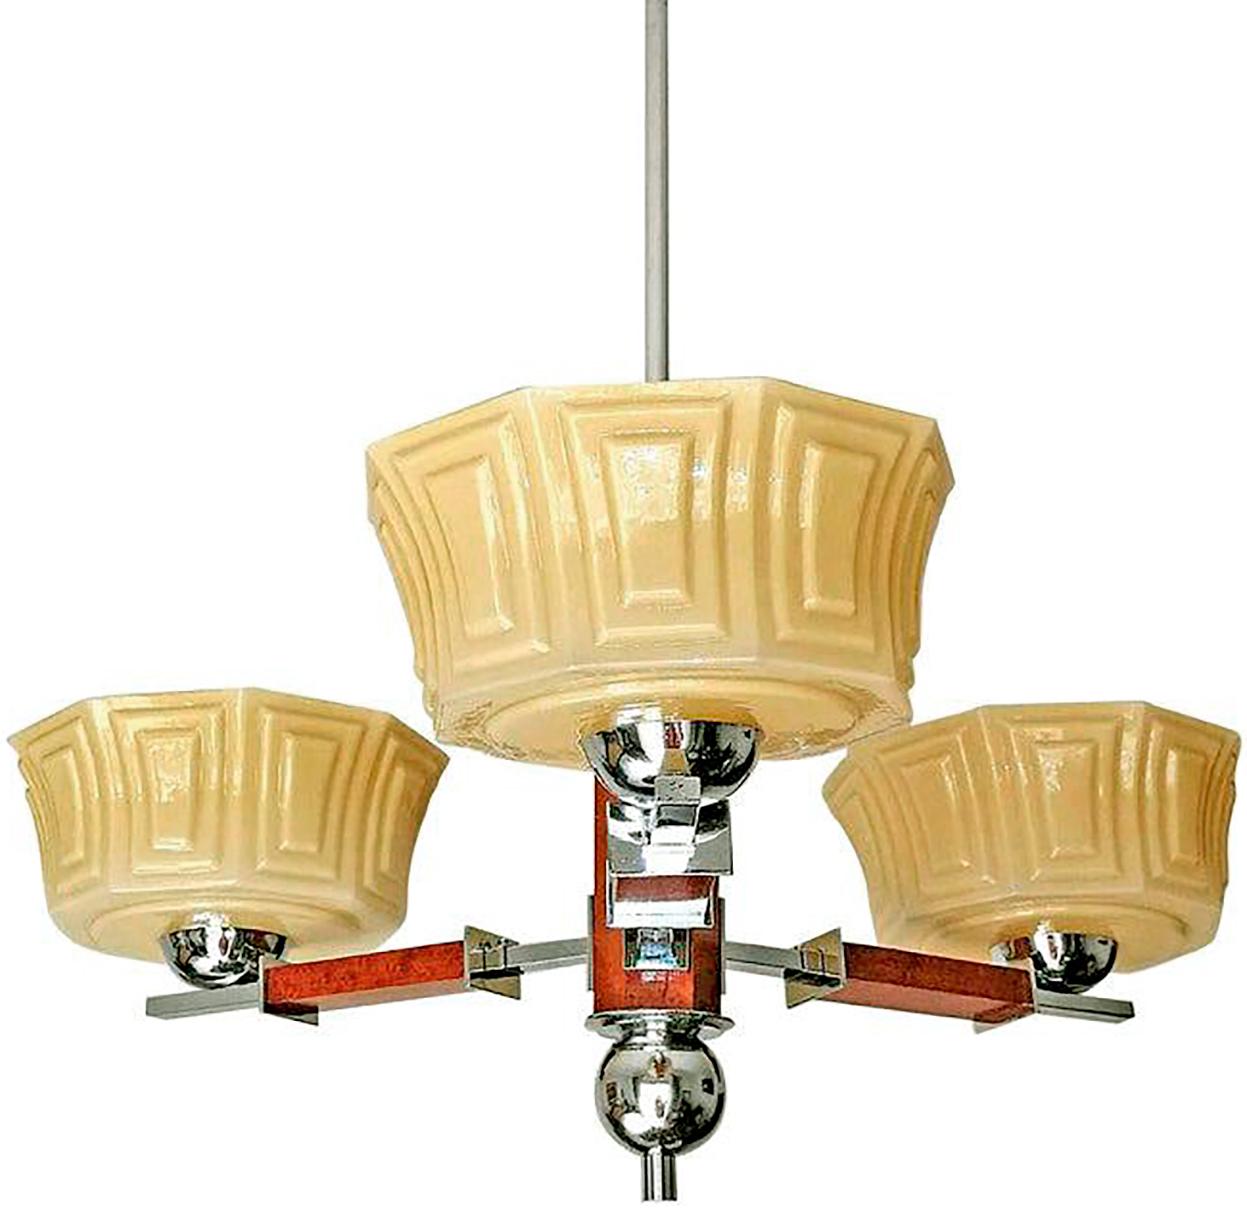 Fabulous Bauhaus French Art Deco with gorgeous opaline cased amber glass shades/chromed brass and wood 3-light chandelier.
Measures:
Width 32 in/ 81 cm
Height 28.5 in/ 72 cm
Depth 11 in / 28 cm
Weight: 7 lb/ 3 Kg
2 light bulbs E27/ good working